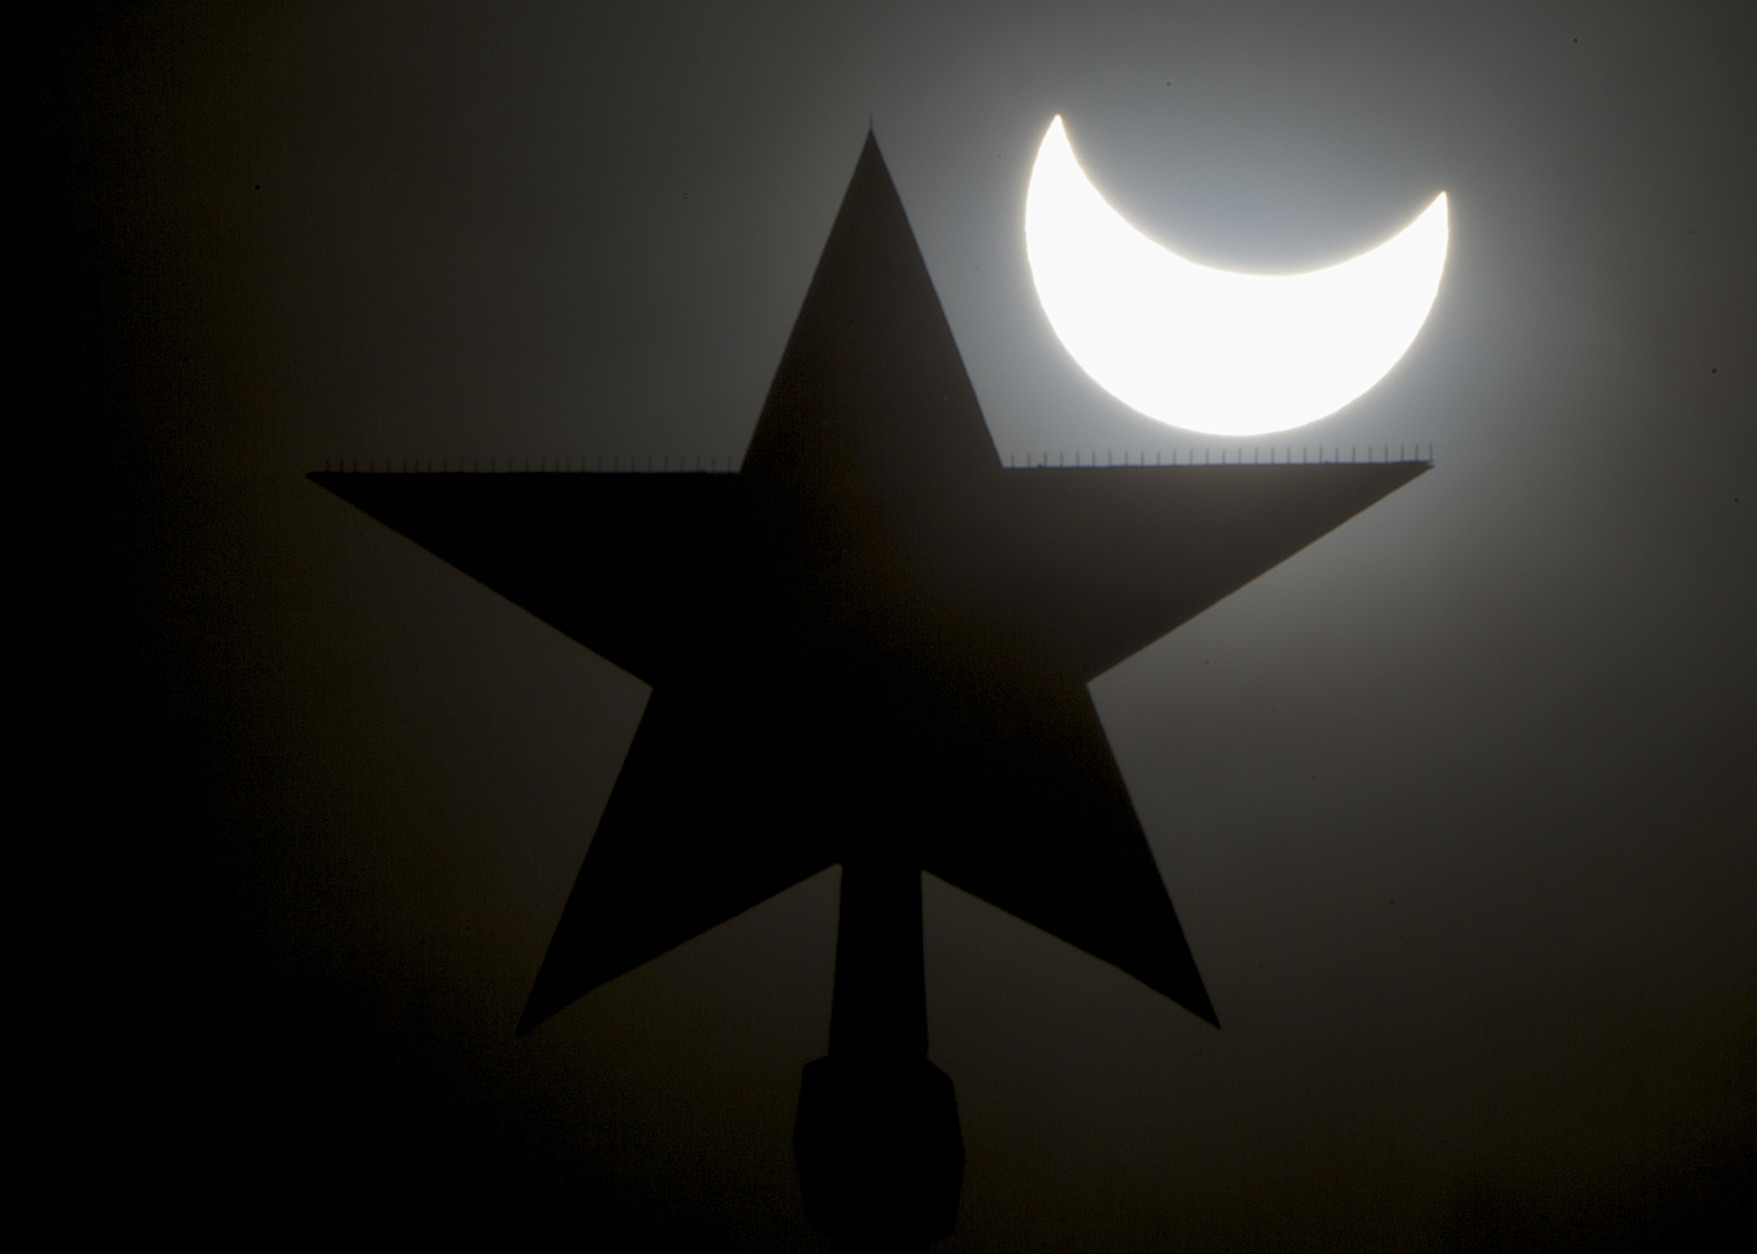 The moon blocks part of the sun during a solar eclipse as seen over Moscow Kremlin's Troitskaya (Trinity) tower, in Russia, on Friday, March 20, 2015. (AP Photo/Pavel Golovkin)